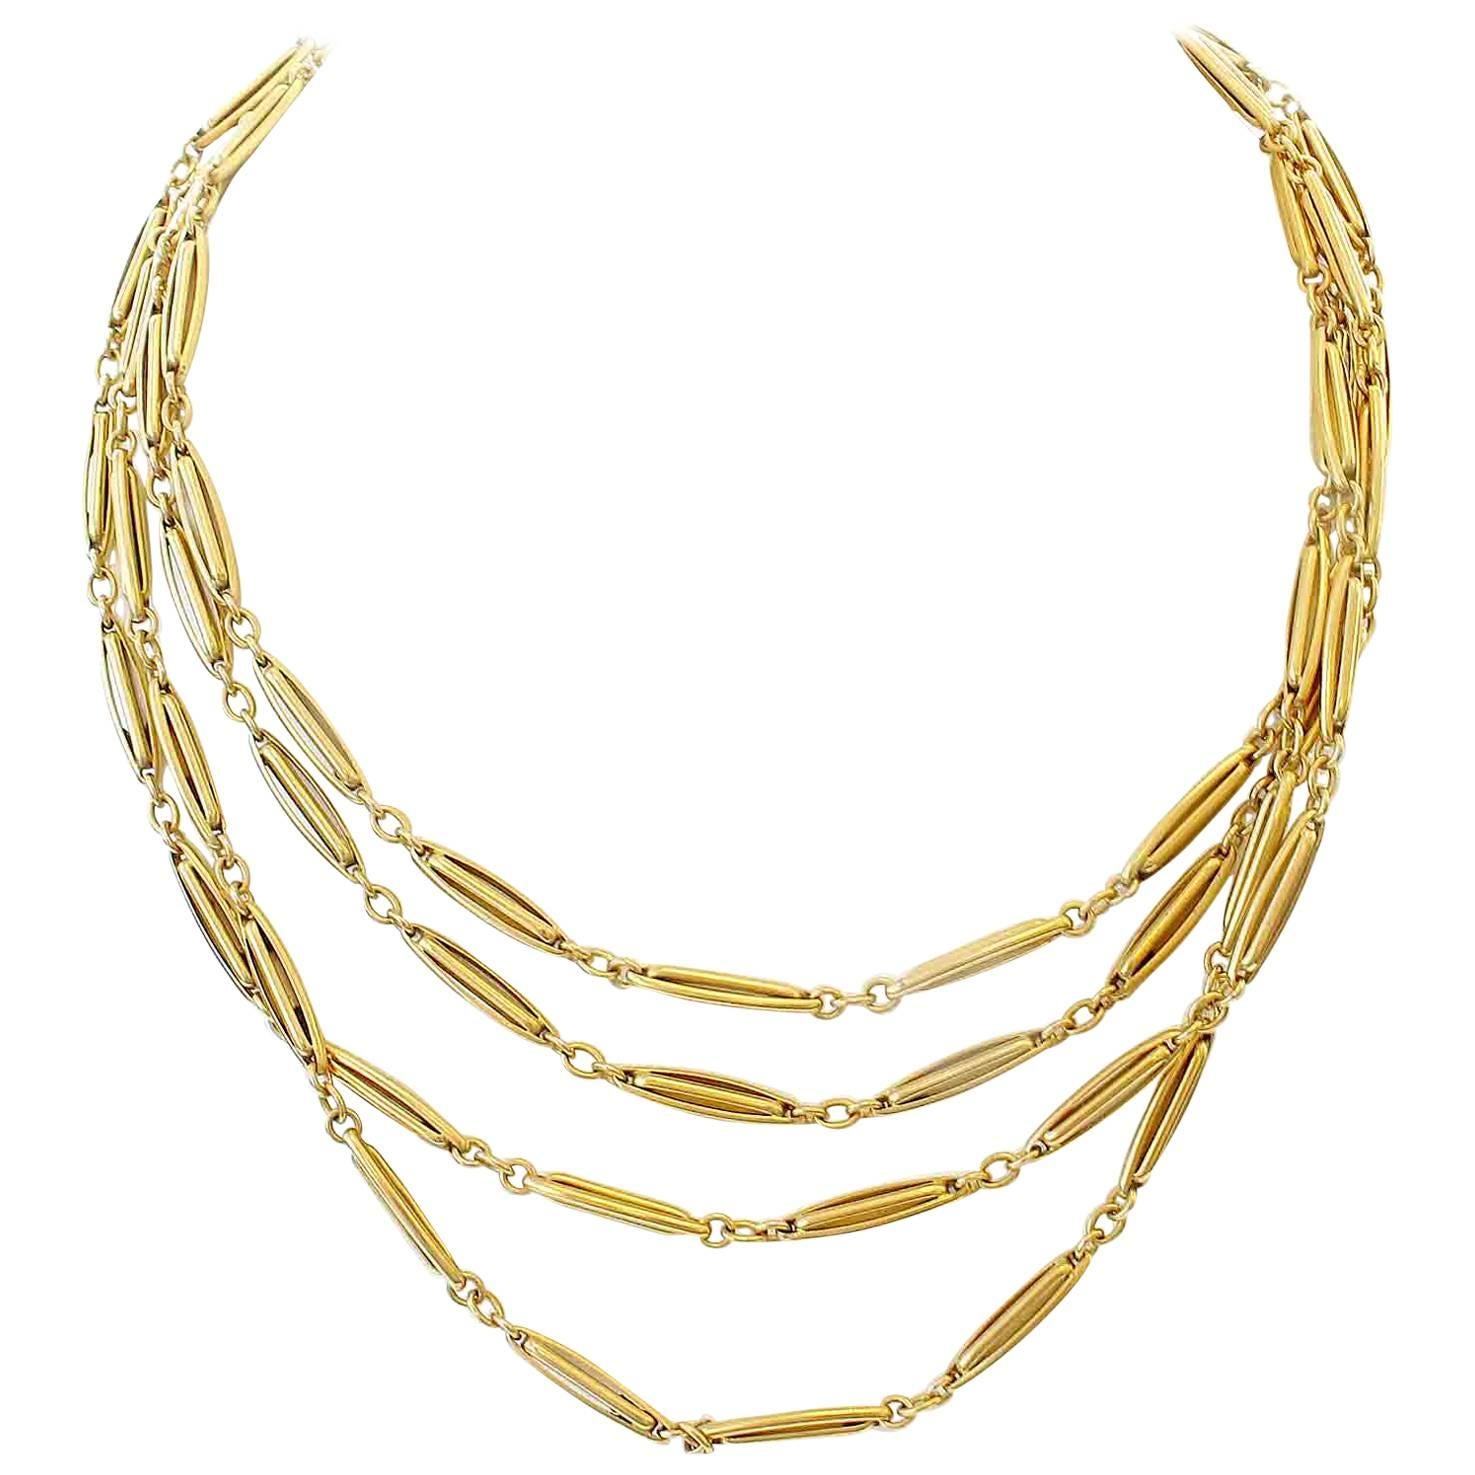  Long French Prism Link Gold Necklace